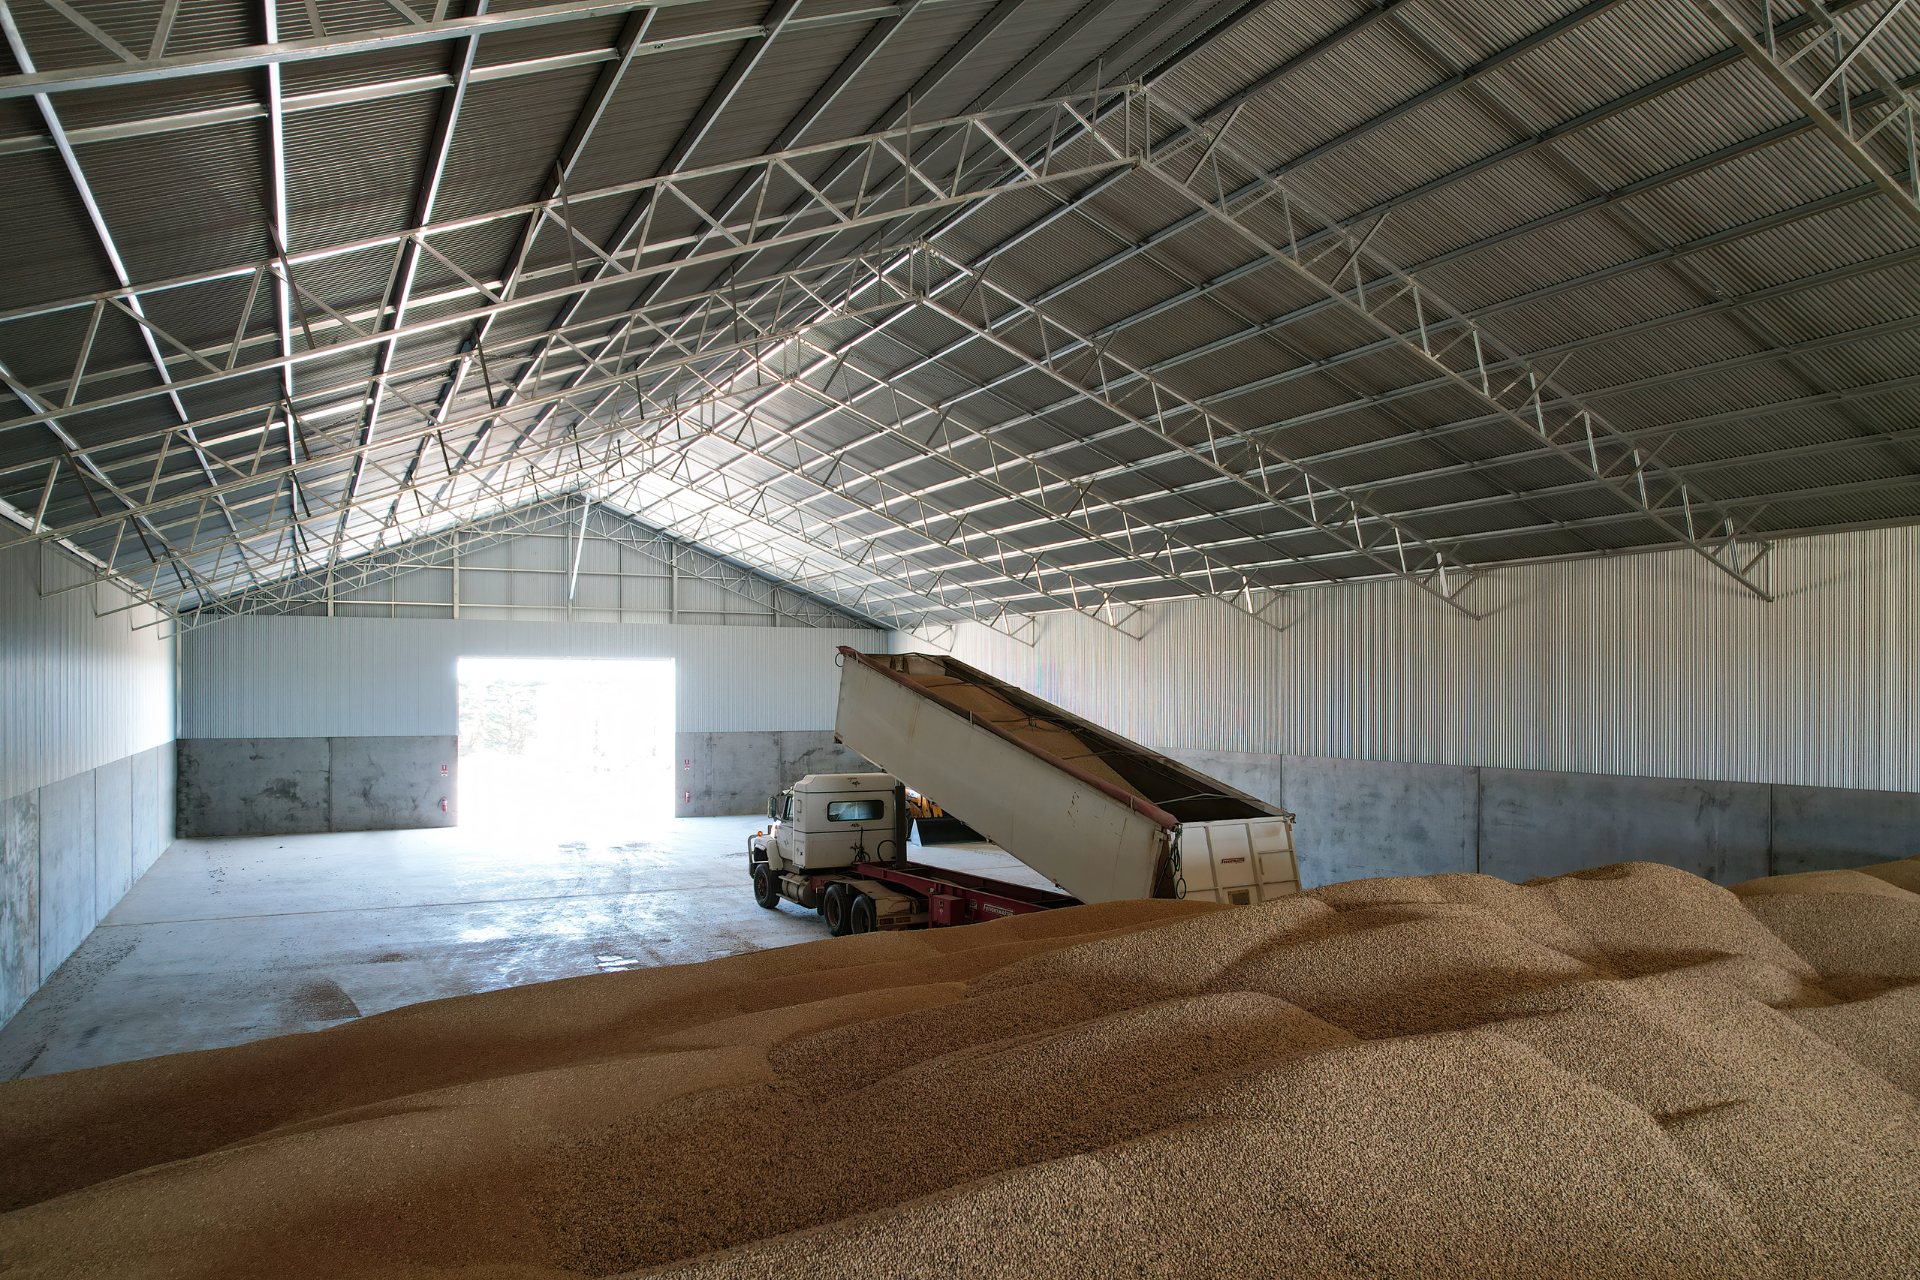 A 68.75m x 27m x 7.5m grain shed at Dundonnell VIC